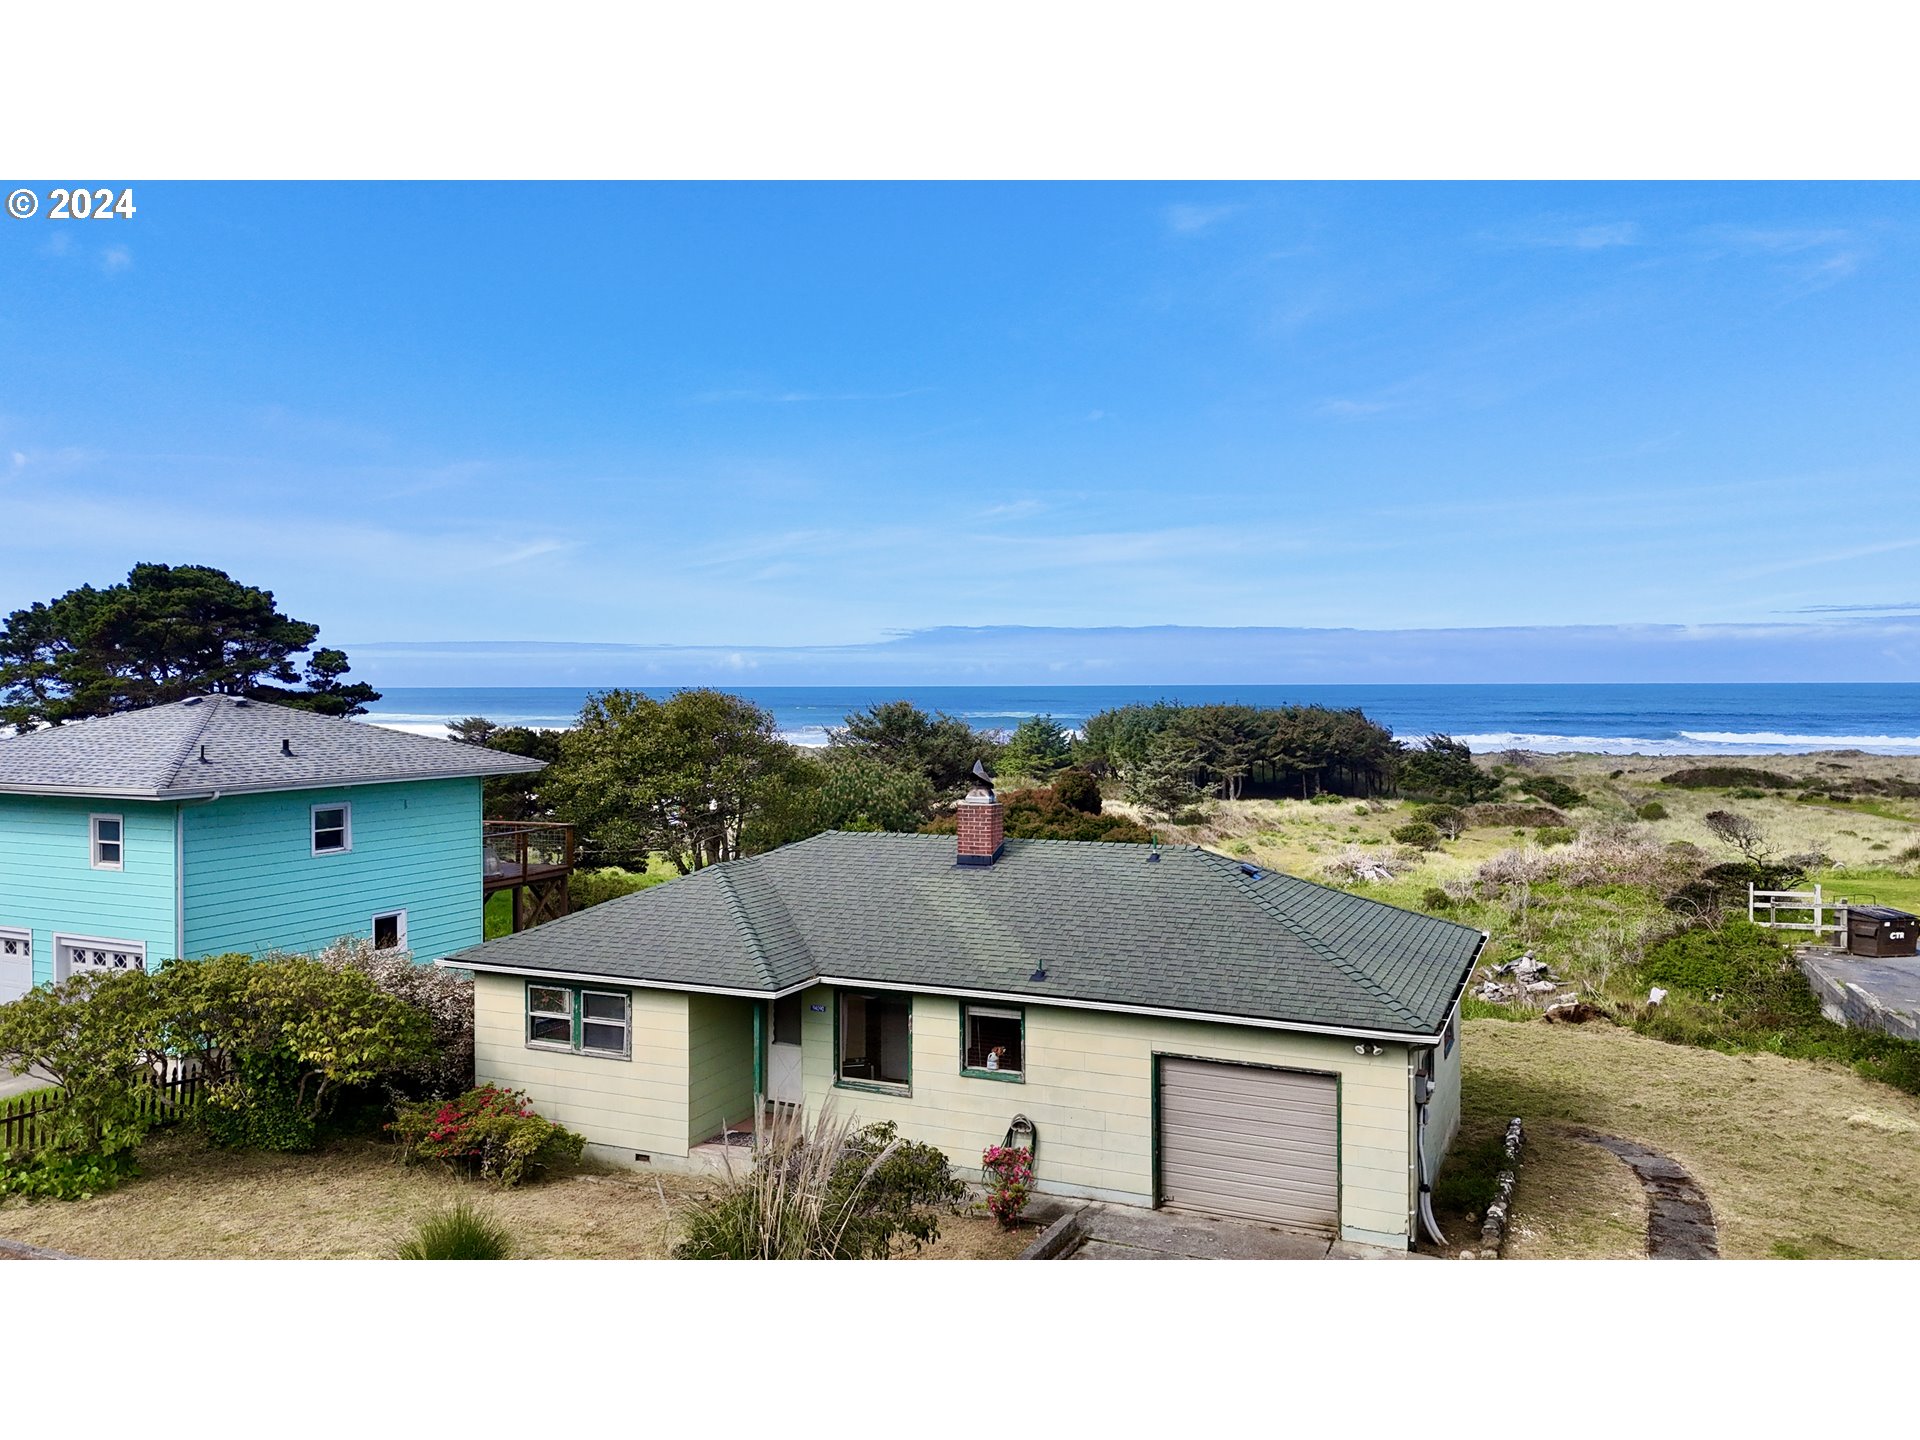 94090 WEBER WAY Gold Beach, Brookings Home Listings - Pacific Coastal Real Estate